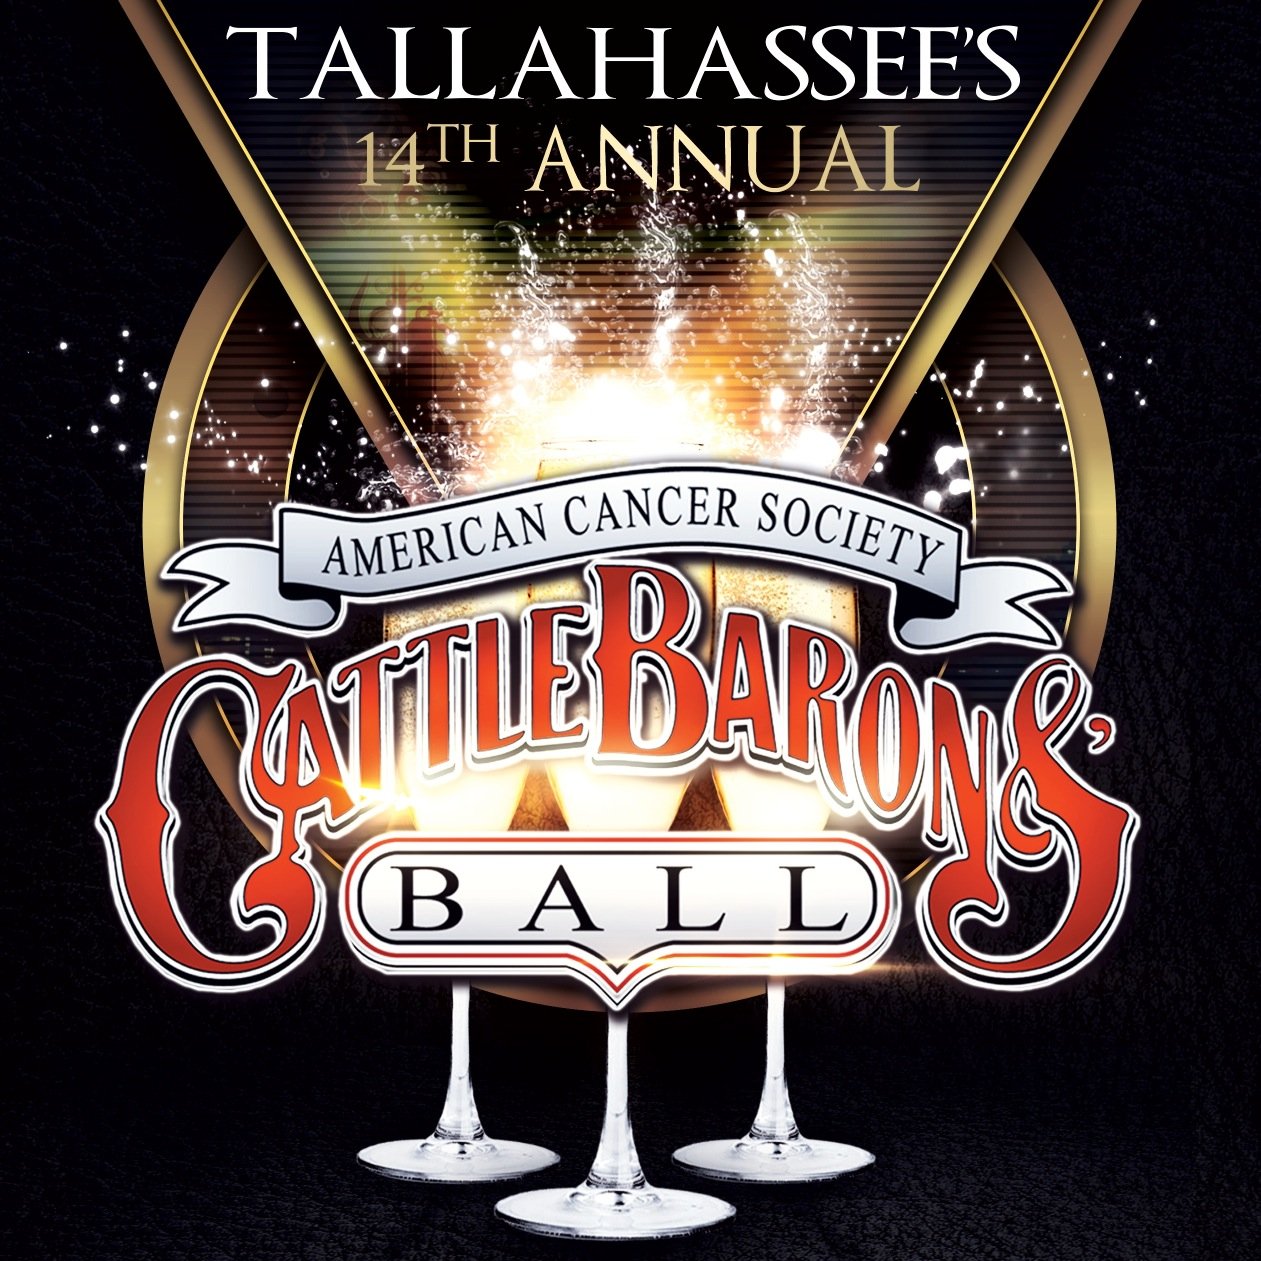 Official Twitter of the Tallahassee Cattle Barons' Ball! #TallyCBB2015 Join us Feb 21, 2015 at Shiloh Farm for this great event supporting @AmericanCancer